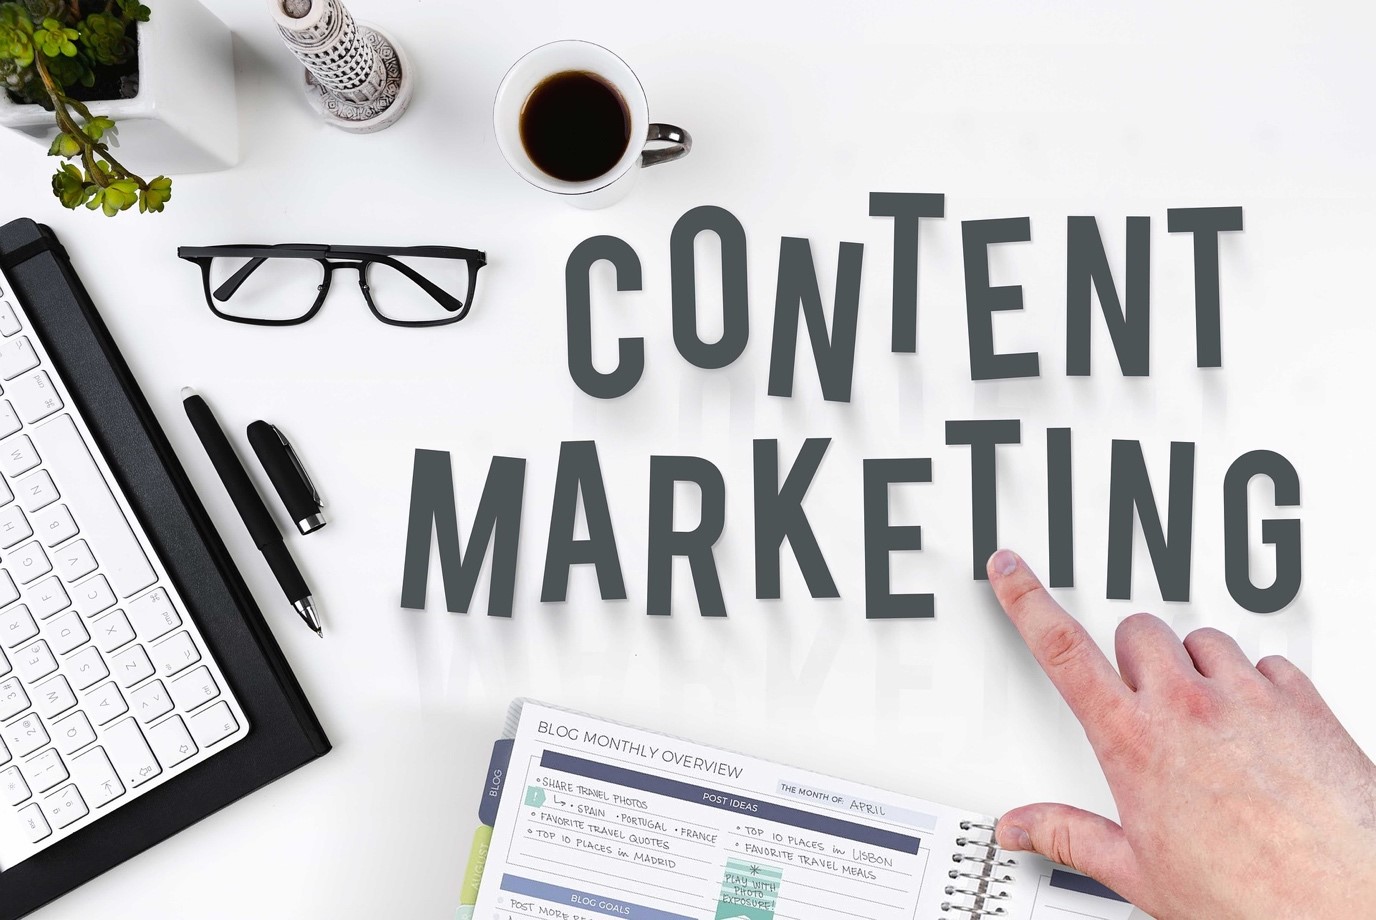 How to Start Content Marketing In 2022